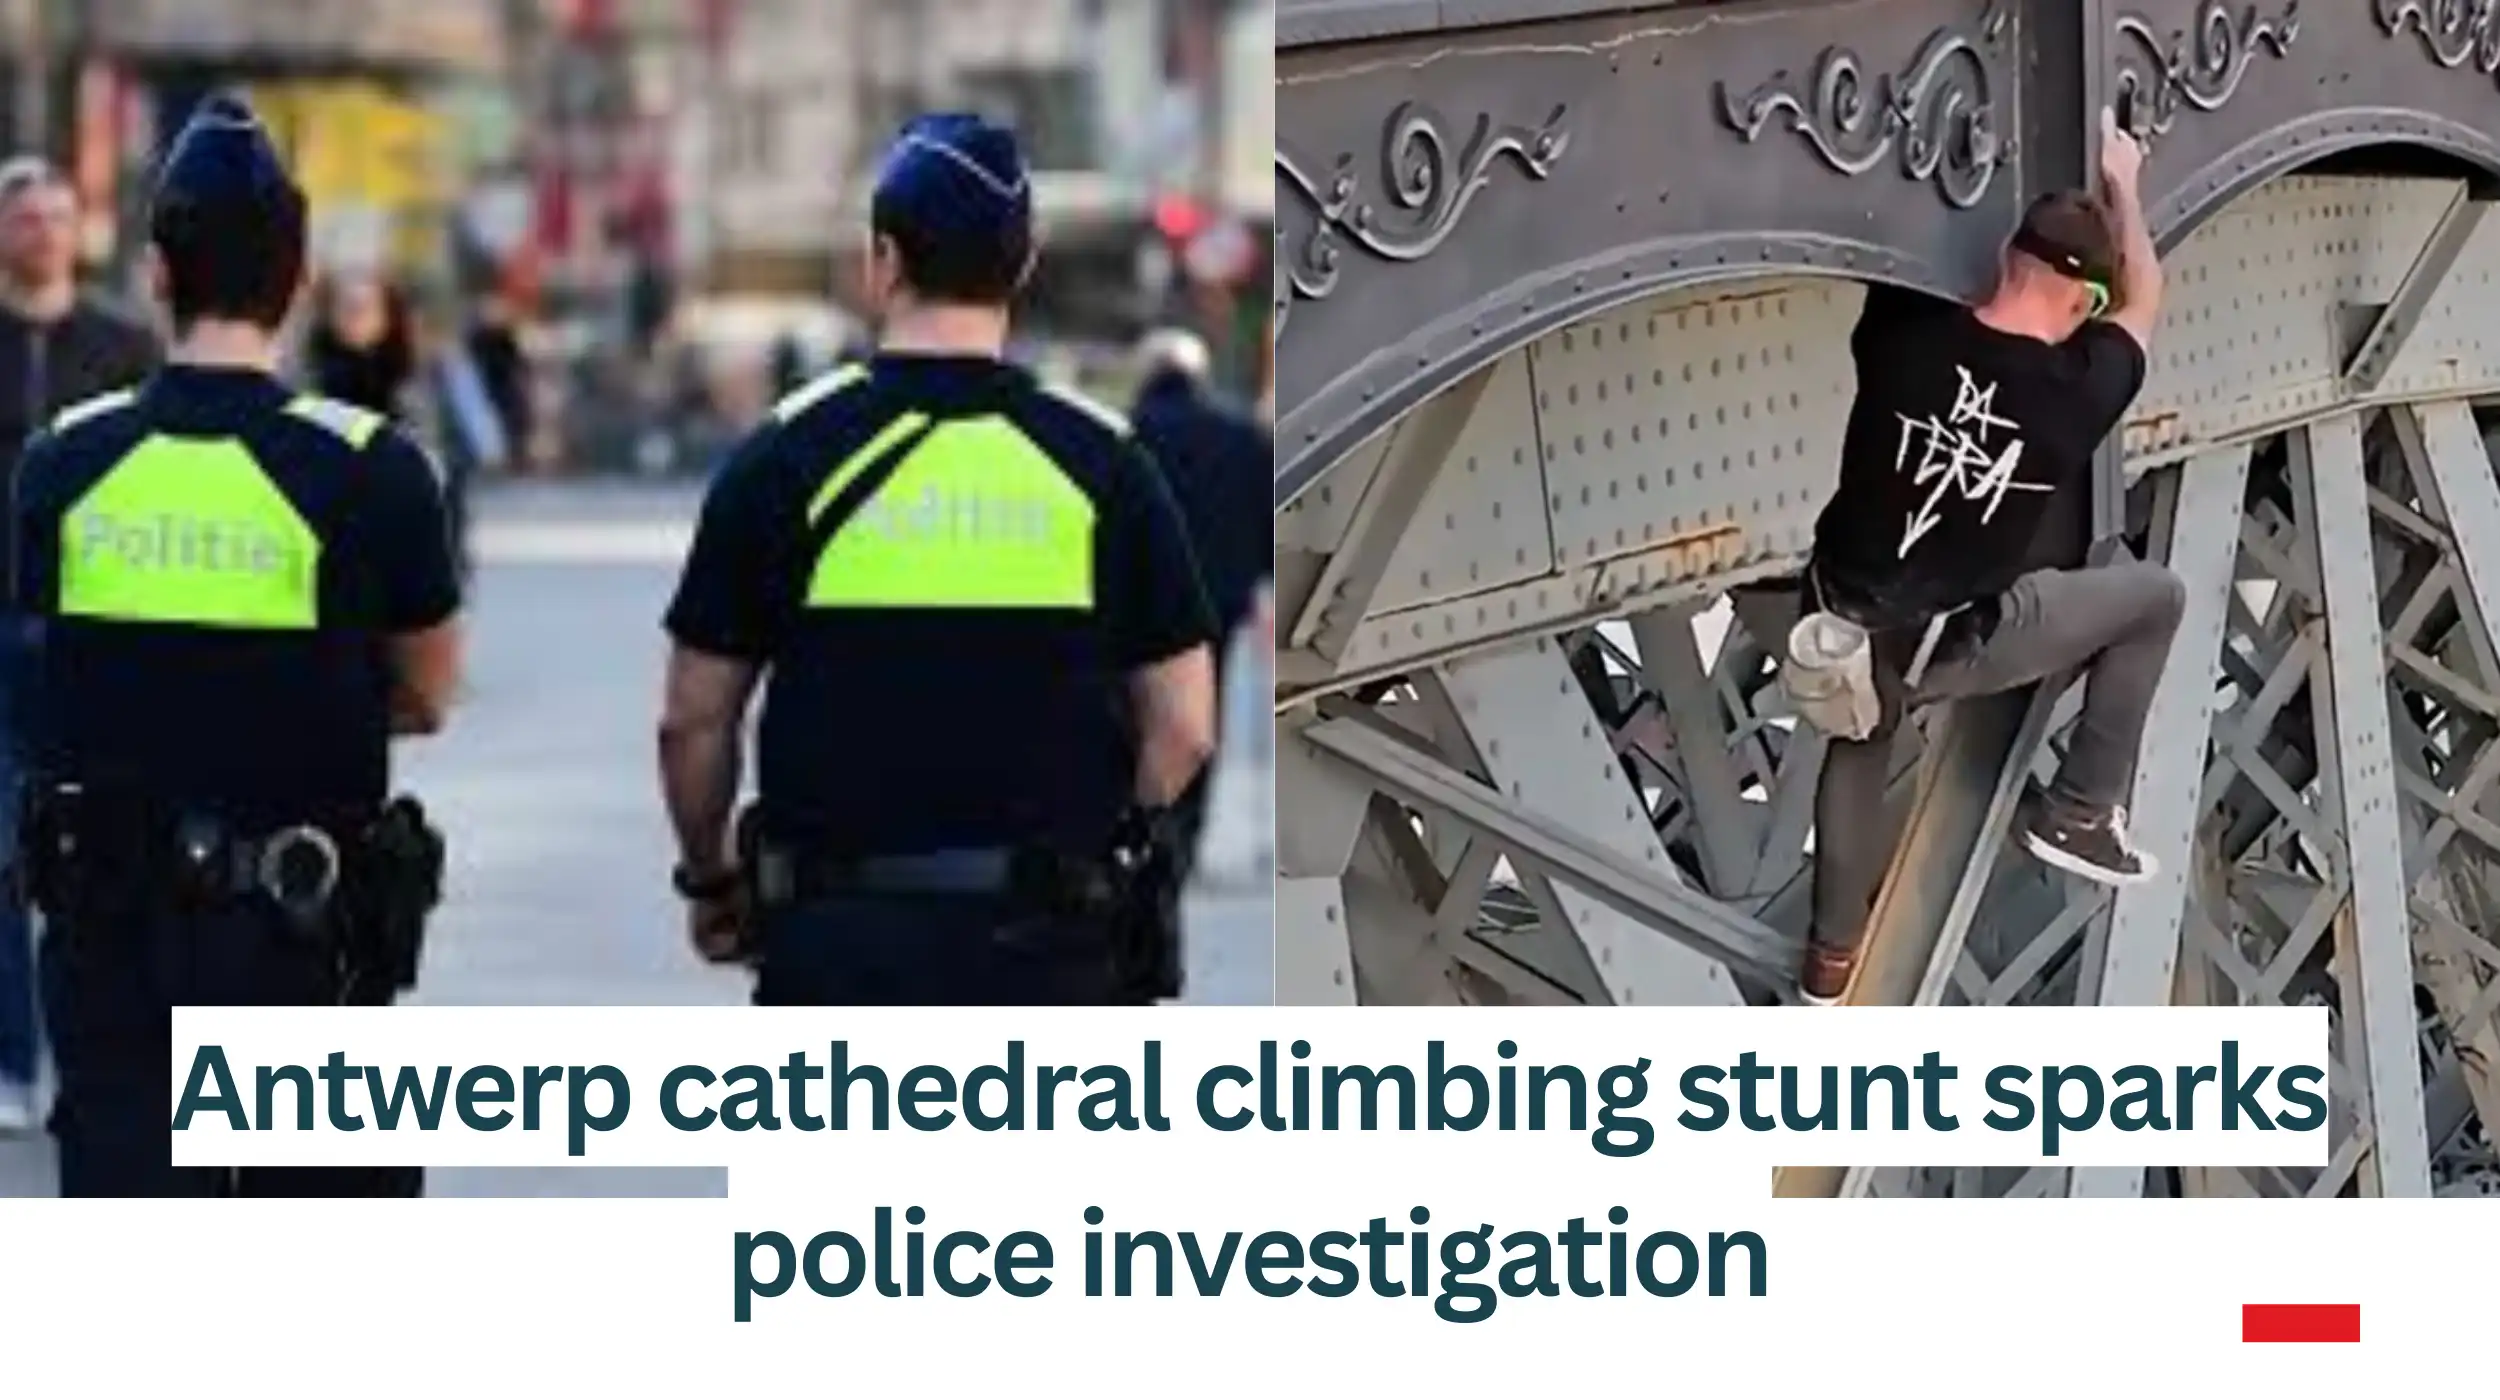 Antwerp-cathedral-climbing-stunt-sparks-police-investigation